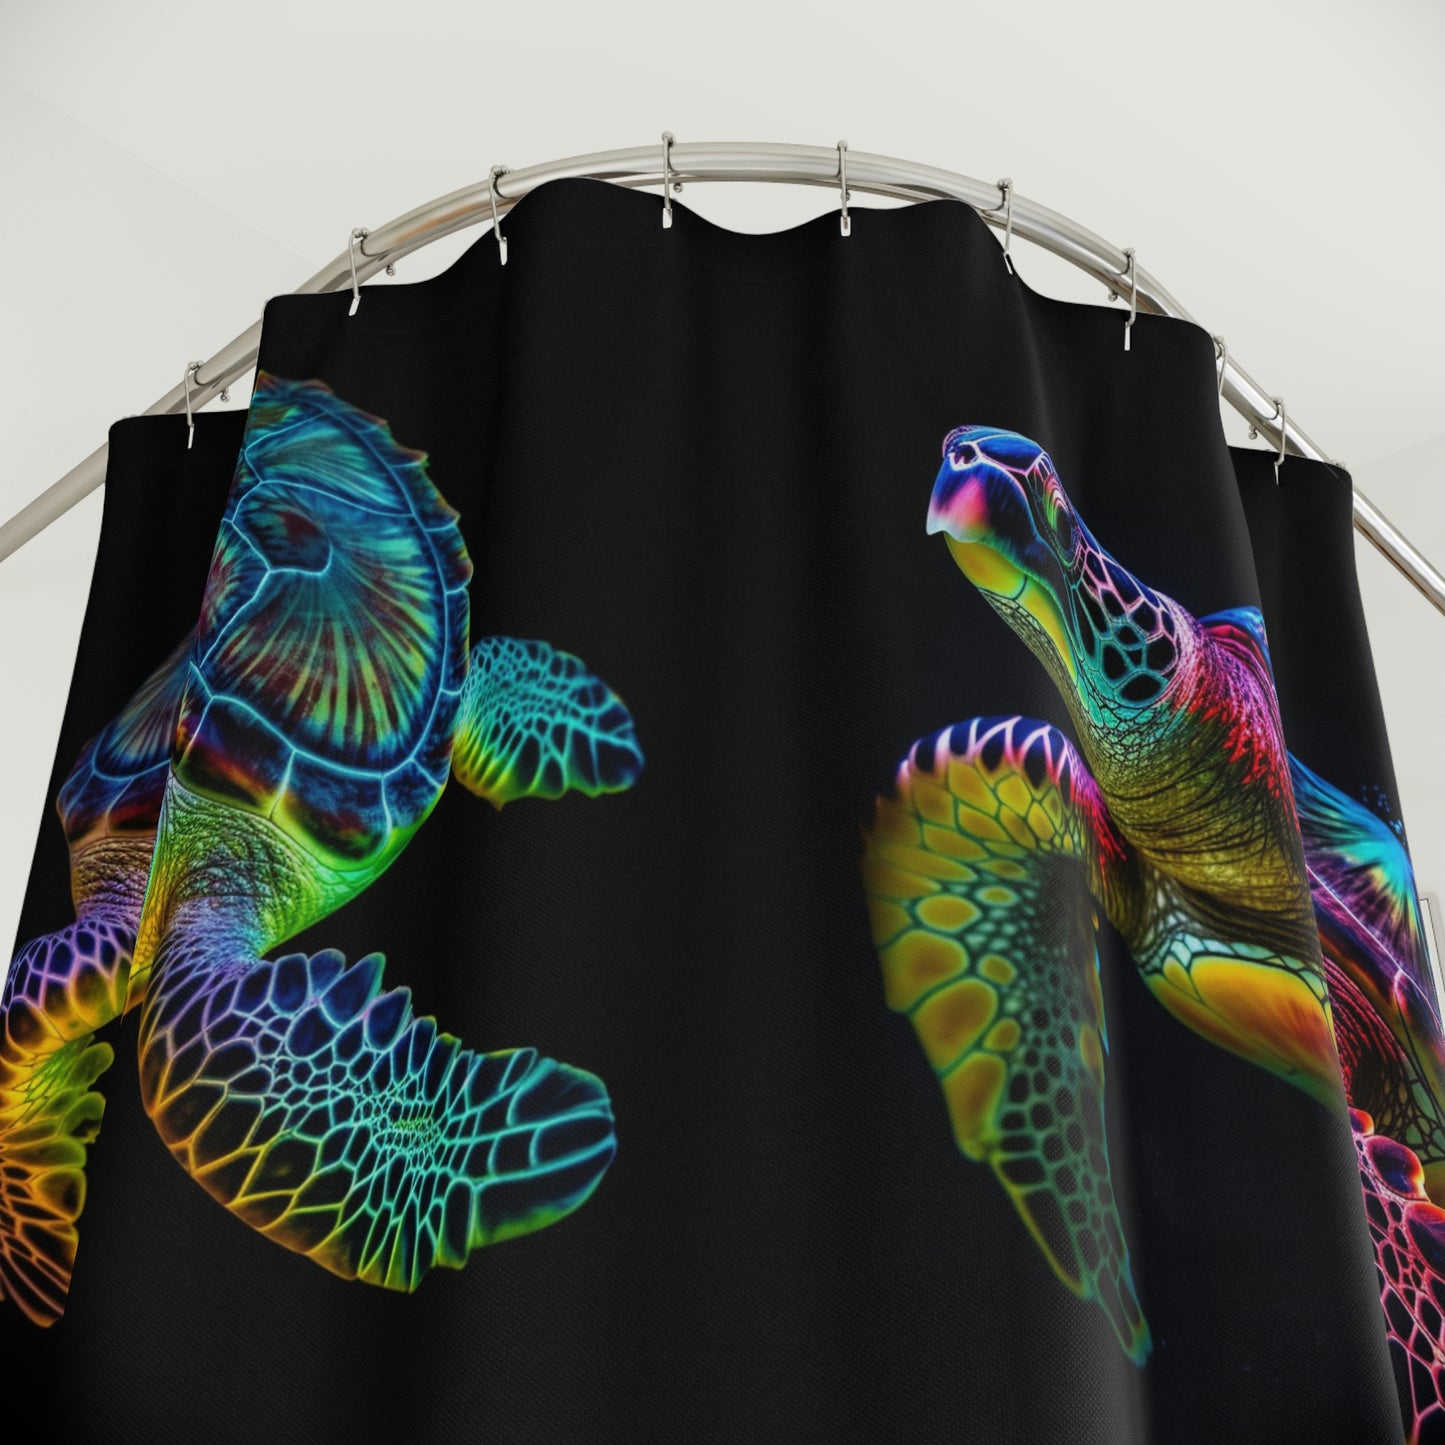 Polyester Shower Curtain neon sea turtle 4 pack